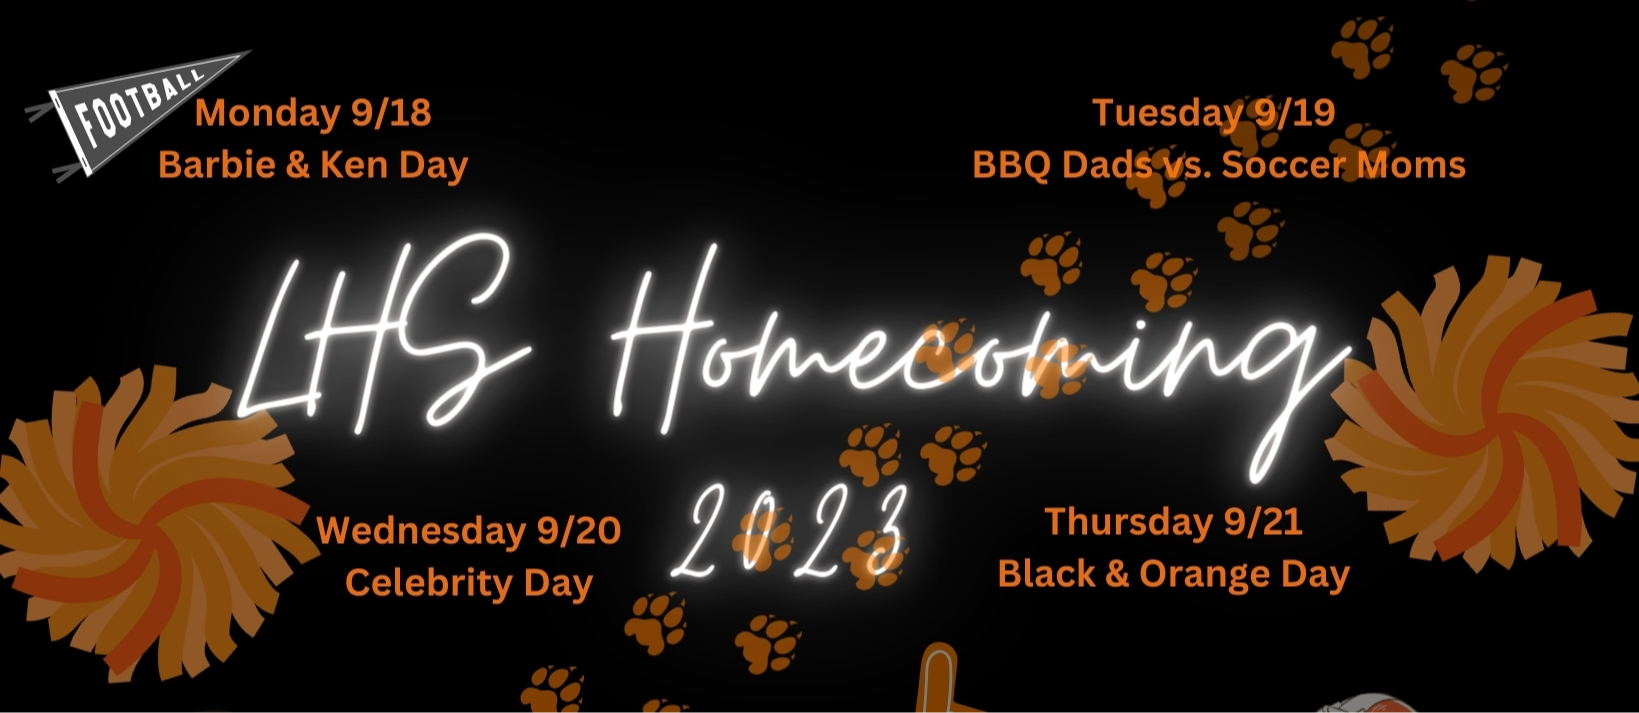 LHS homecoming